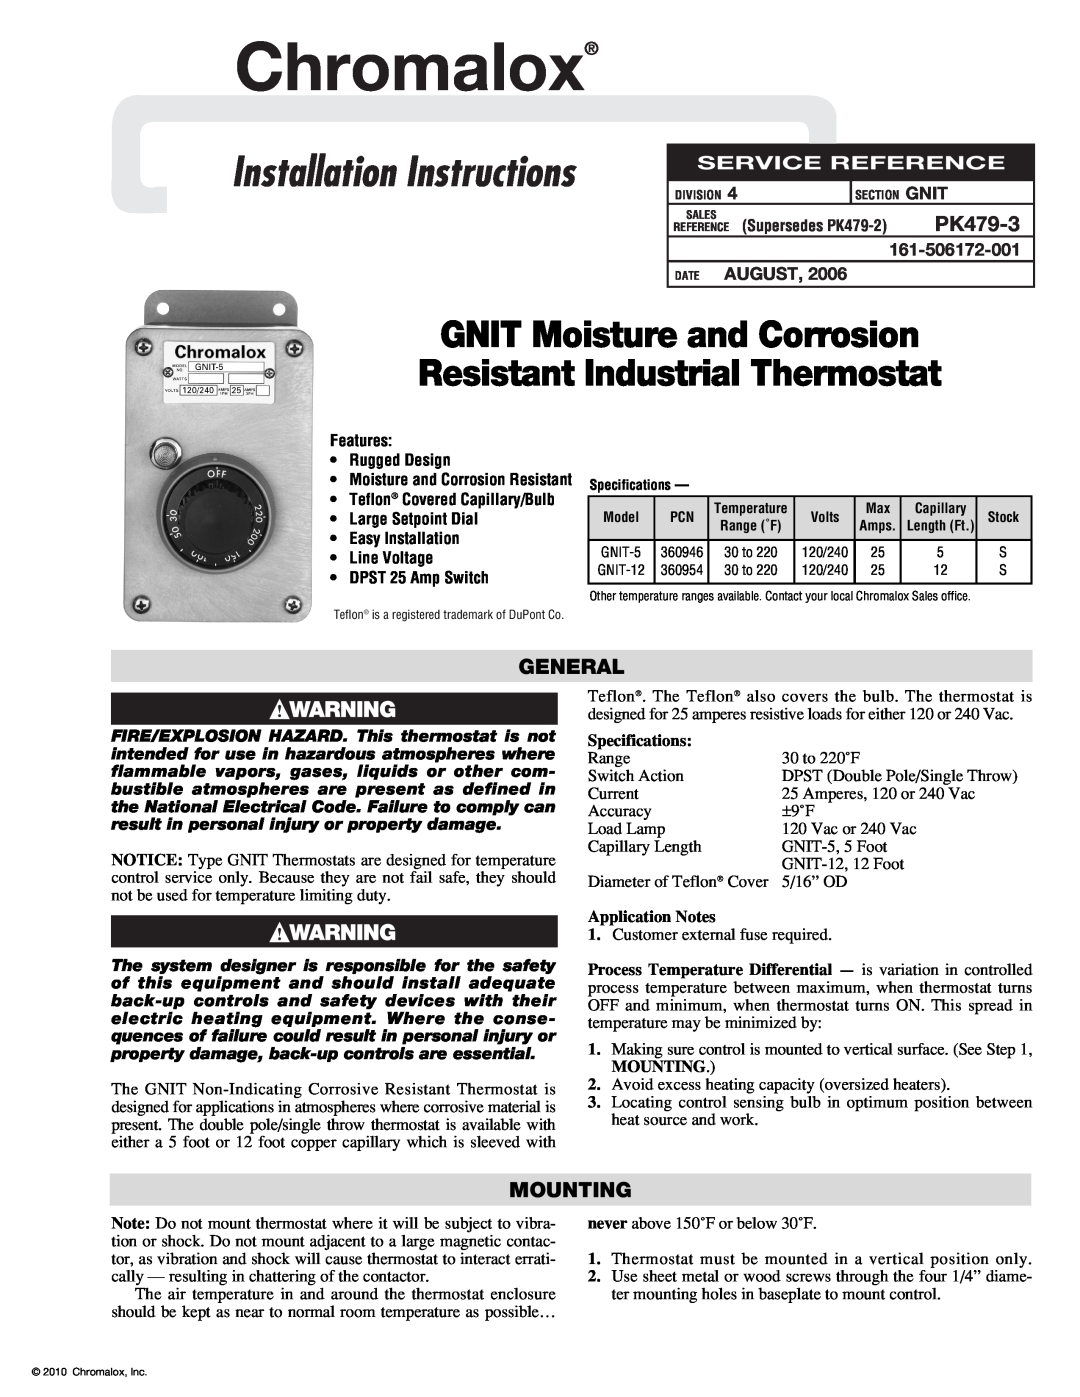 Chromalox GNIT-5 installation instructions PK479-3, General, Mounting, Date August, Specifications, Application Notes 